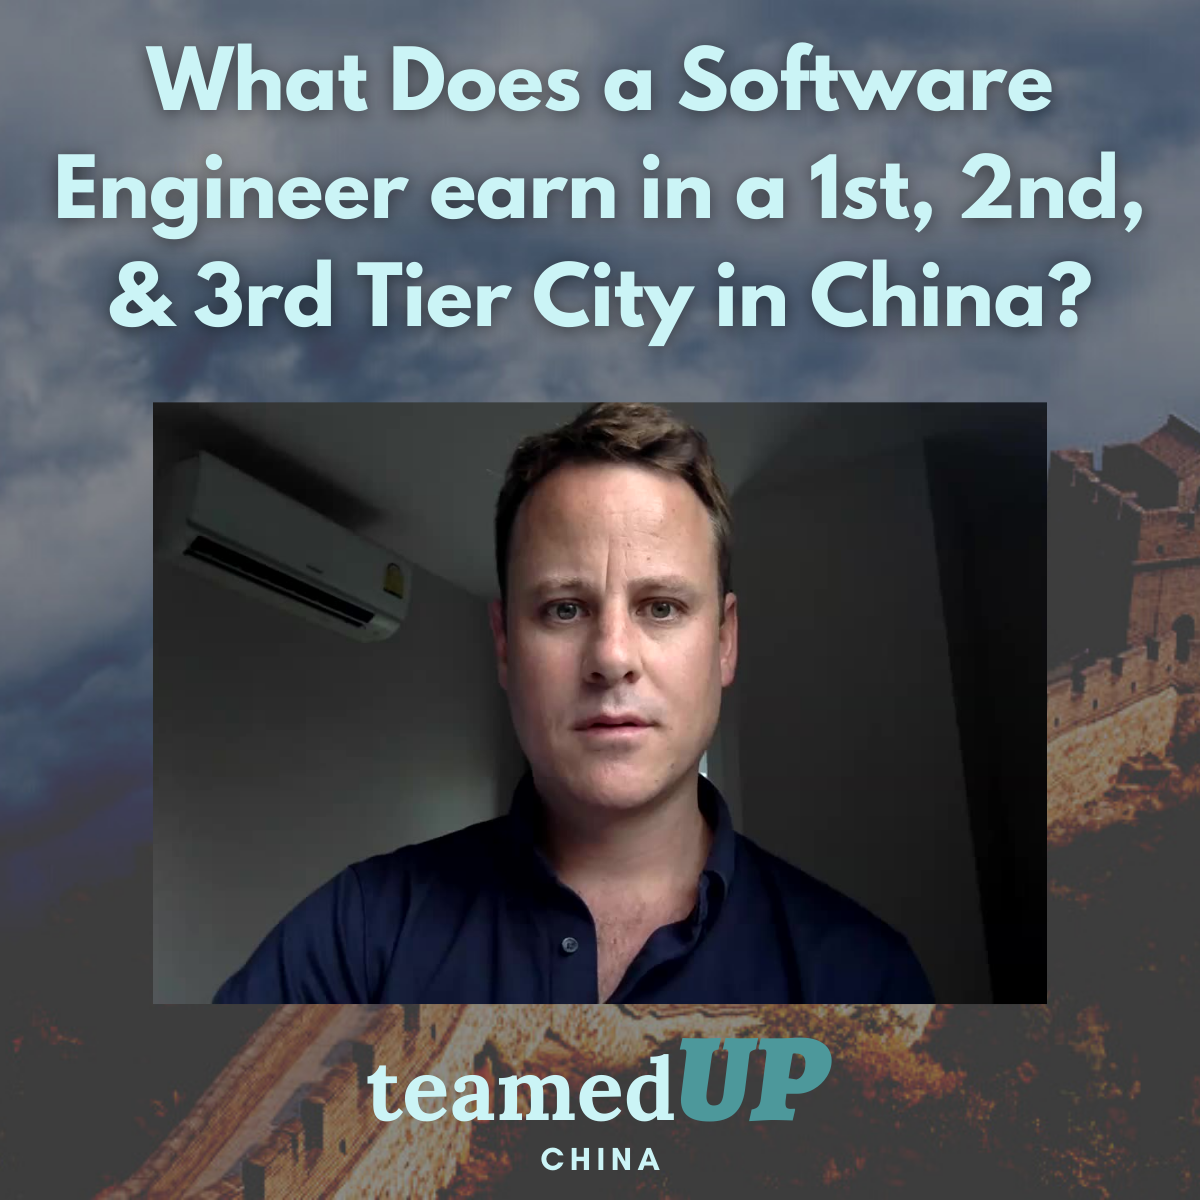 What Does a Software Engineer earn in a 1st, 2nd, & 3rd Tier City in China?